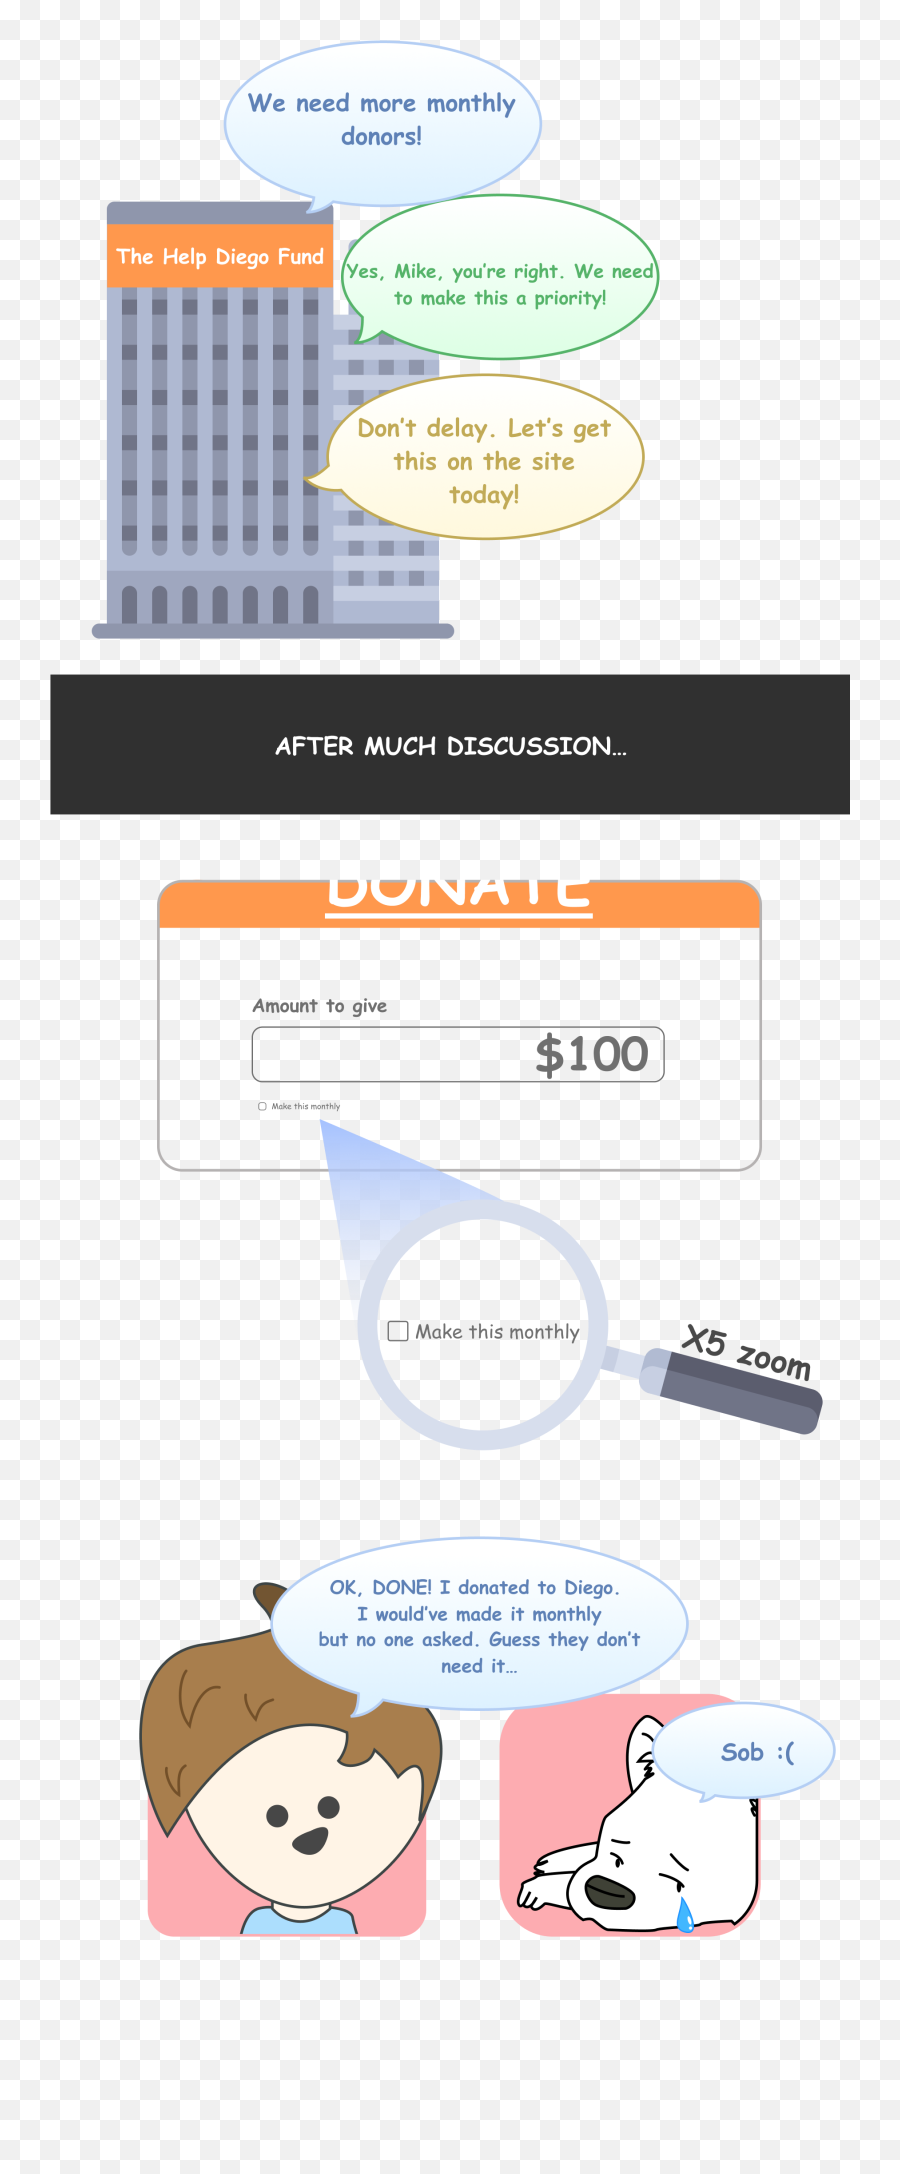 Donation Button Png - Why You Should Make Your Monthly Parallel,Donate Button Png